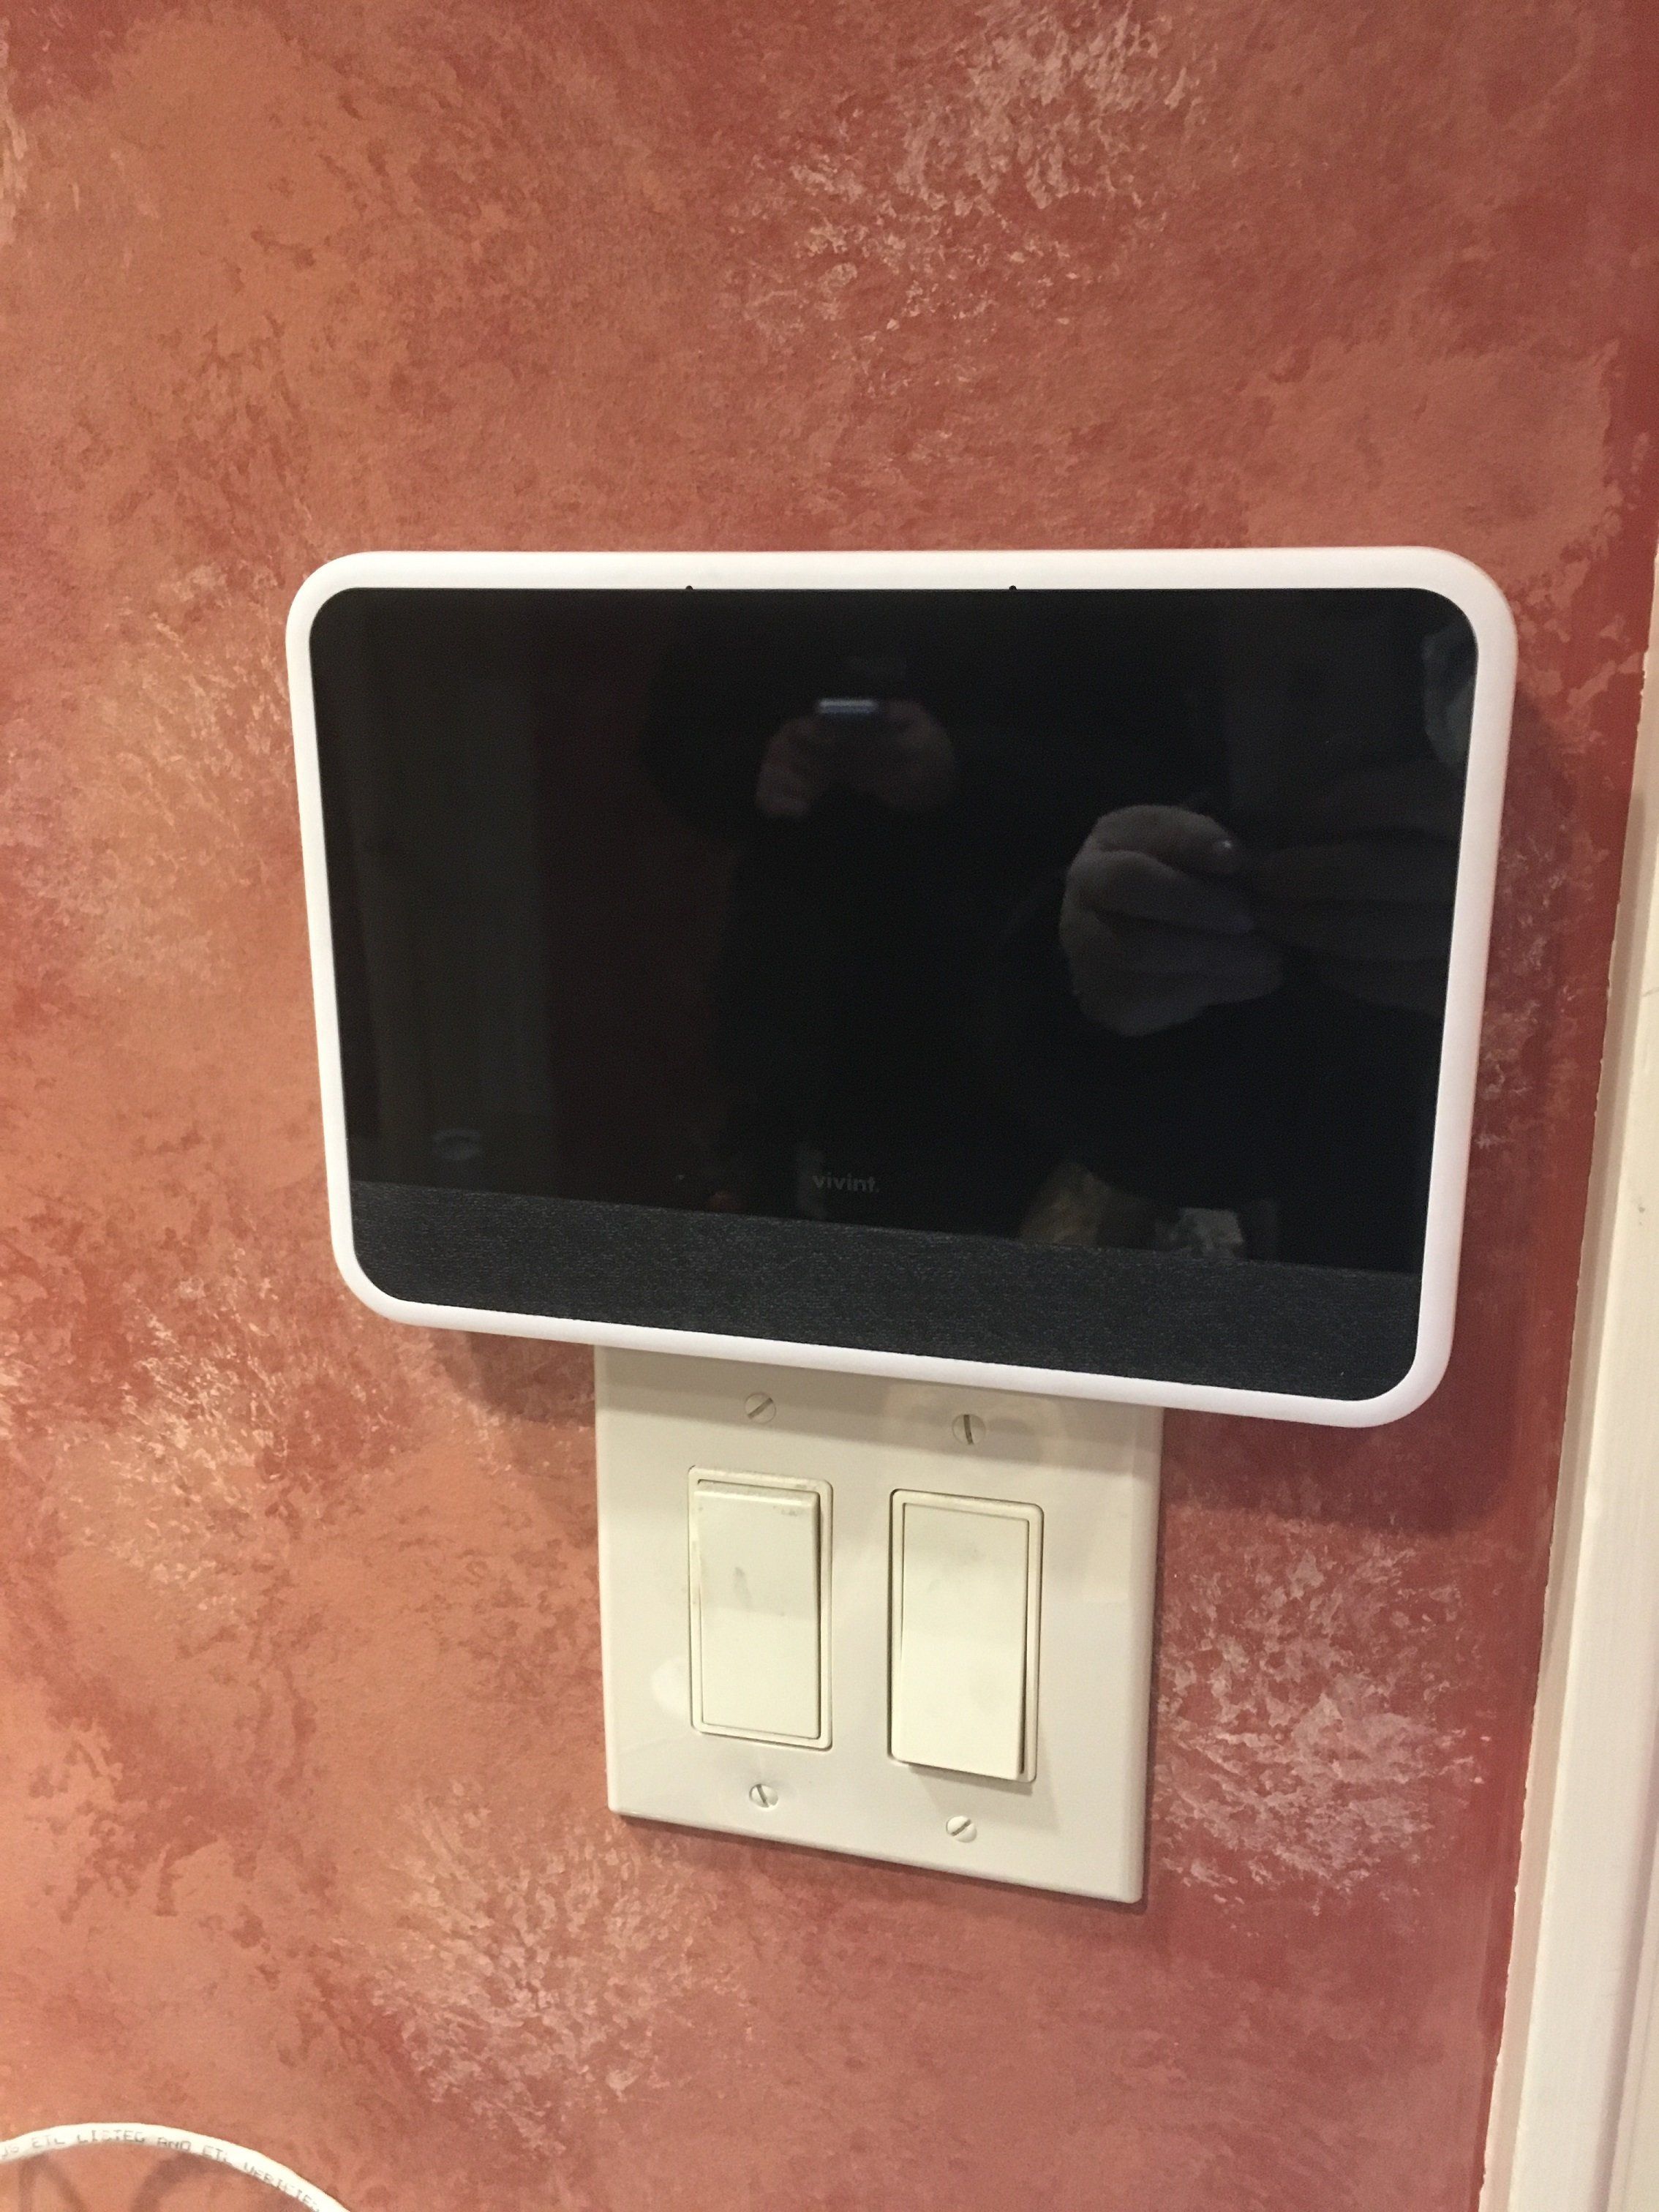 Review Vivint Smart Home A Premiere Home Security System Gearbrain